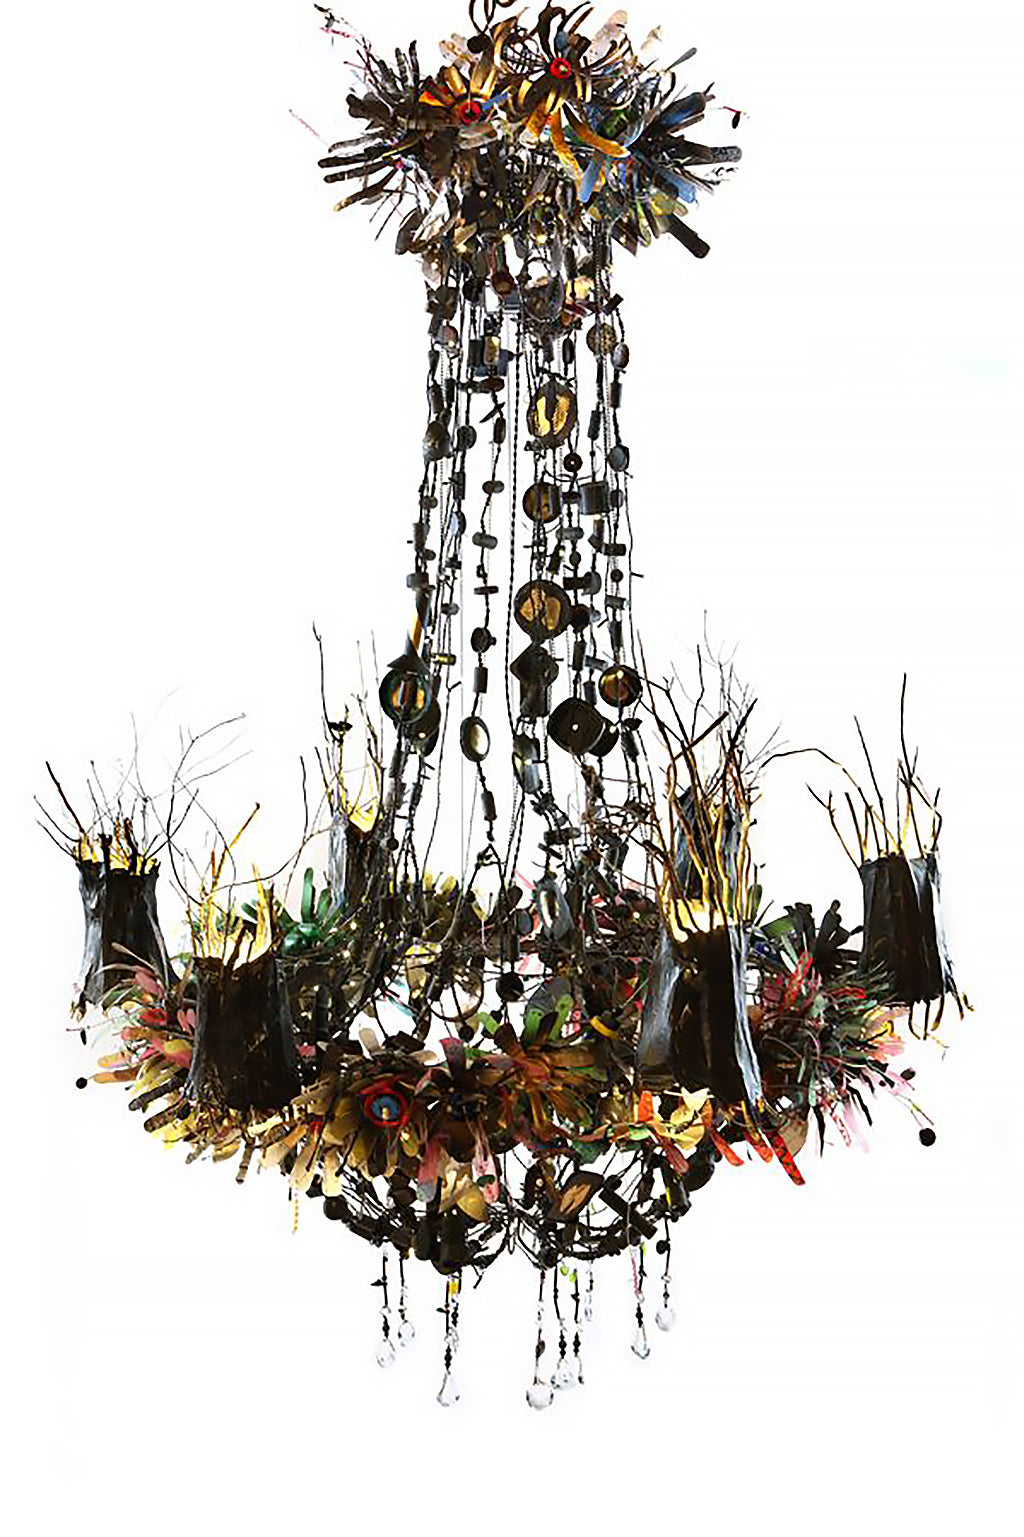 Safari Journal / Blog by Safari Fusion | Recycled chandeliers | Illuminated works of art by Barrydale's Magpie Art Collective [South Africa]